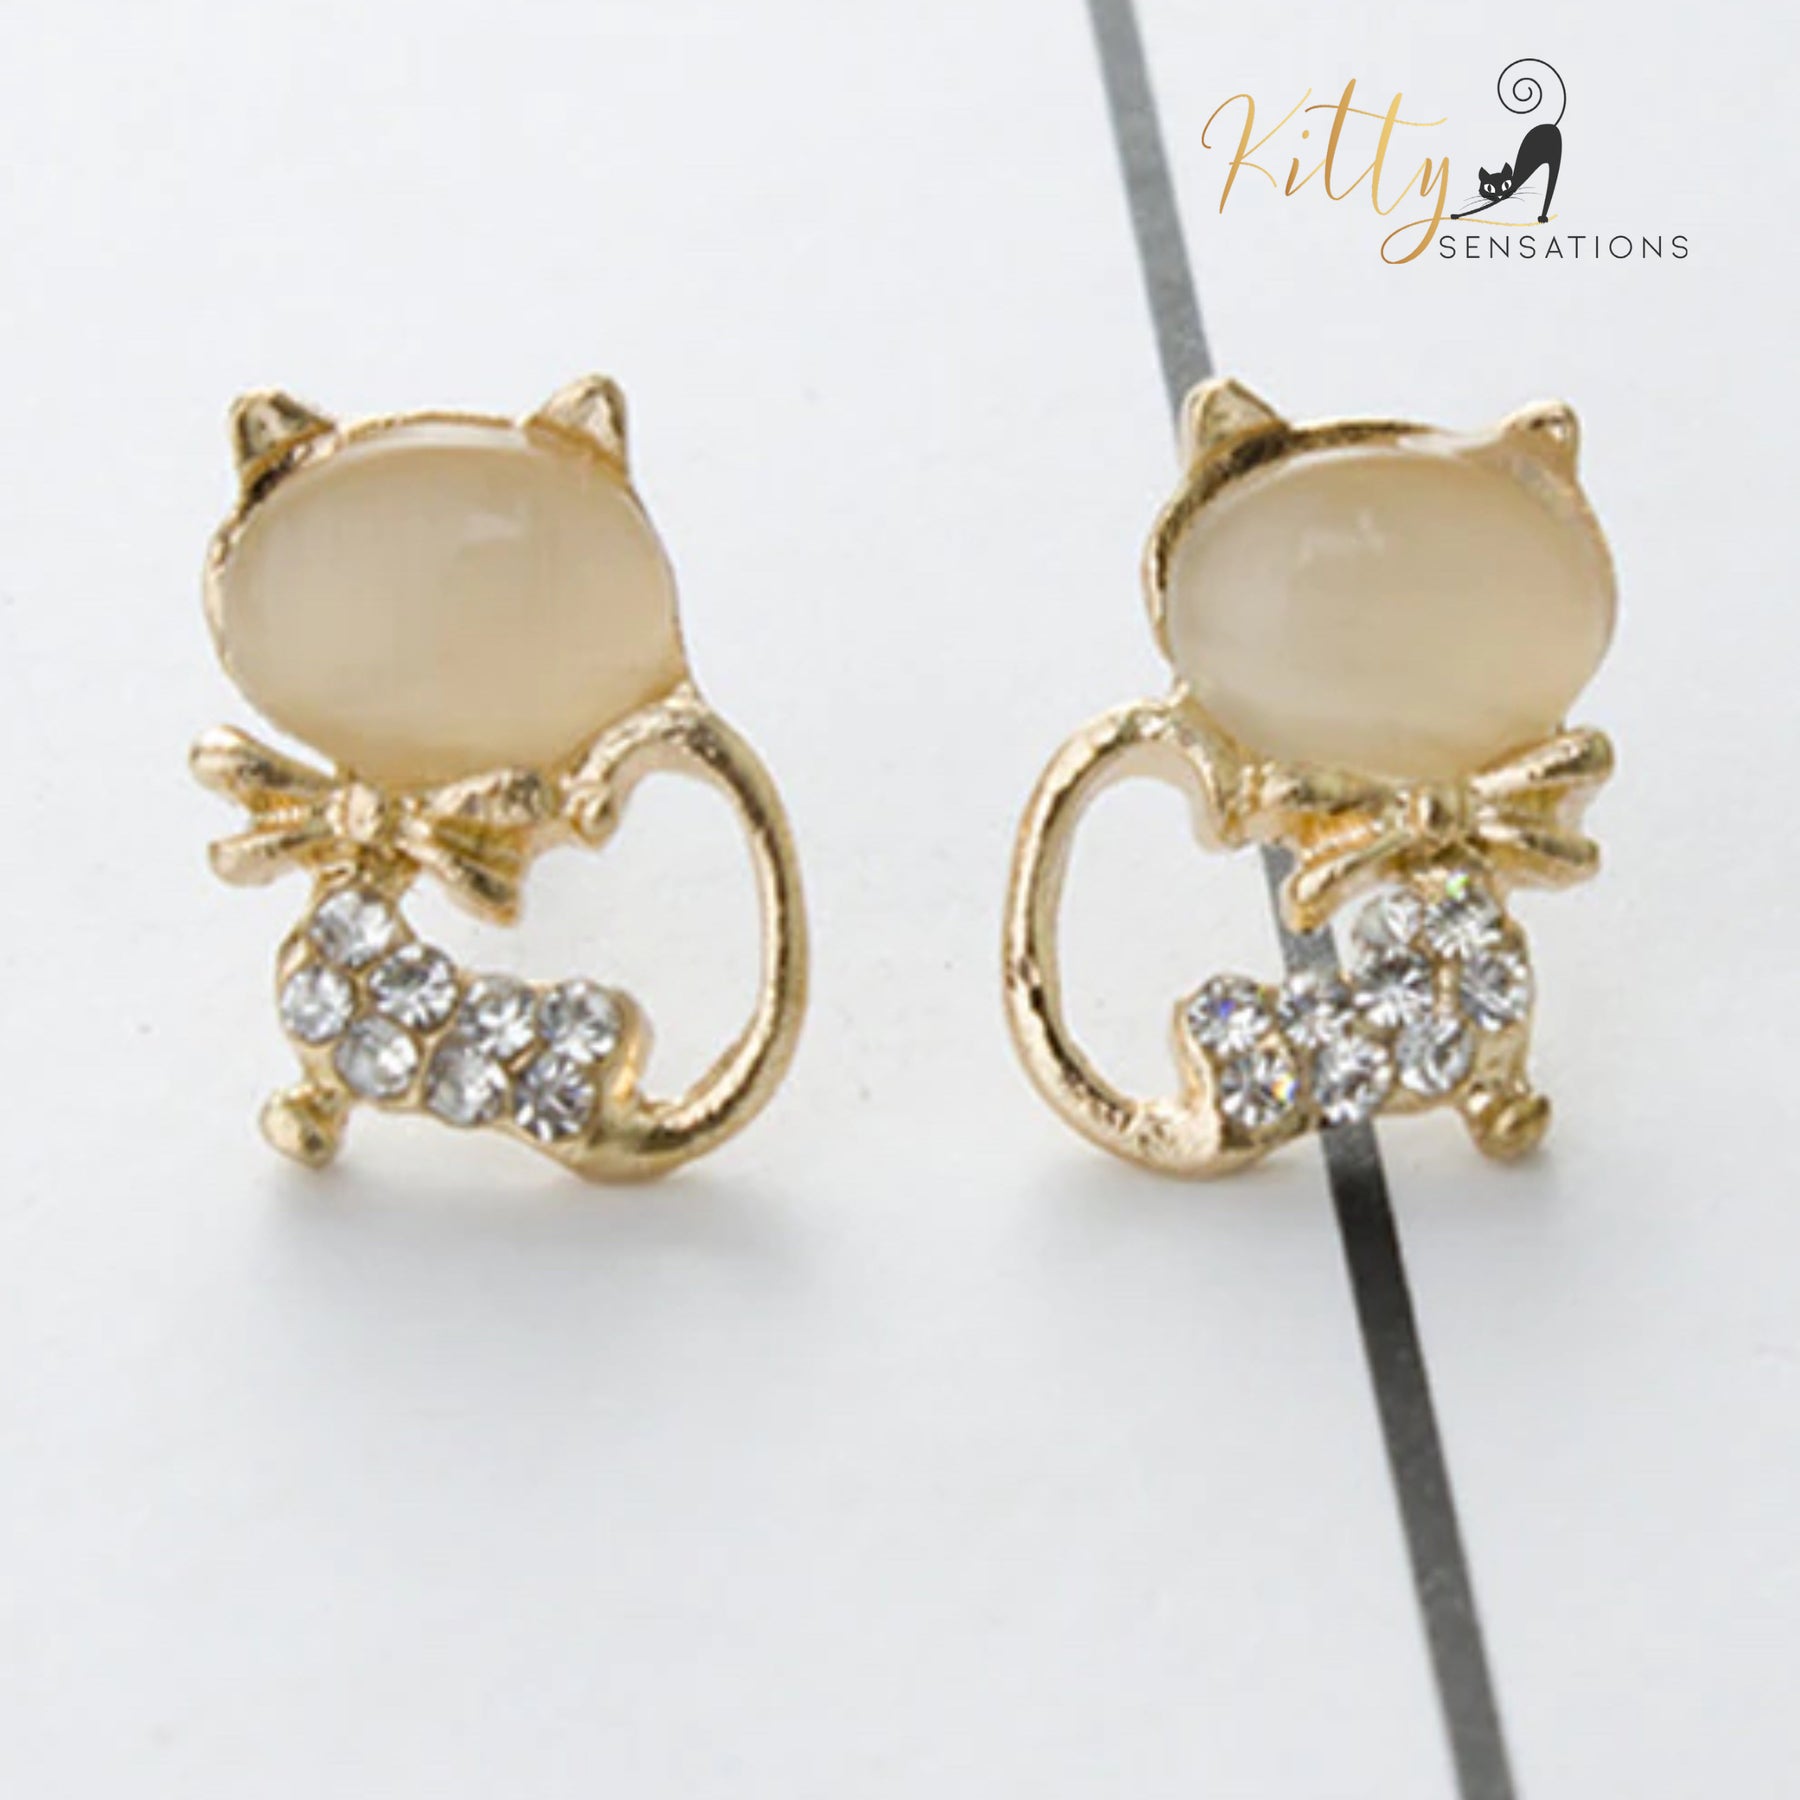 Natural Opal Bow Cat CZ Stud Earrings (White or Pink)